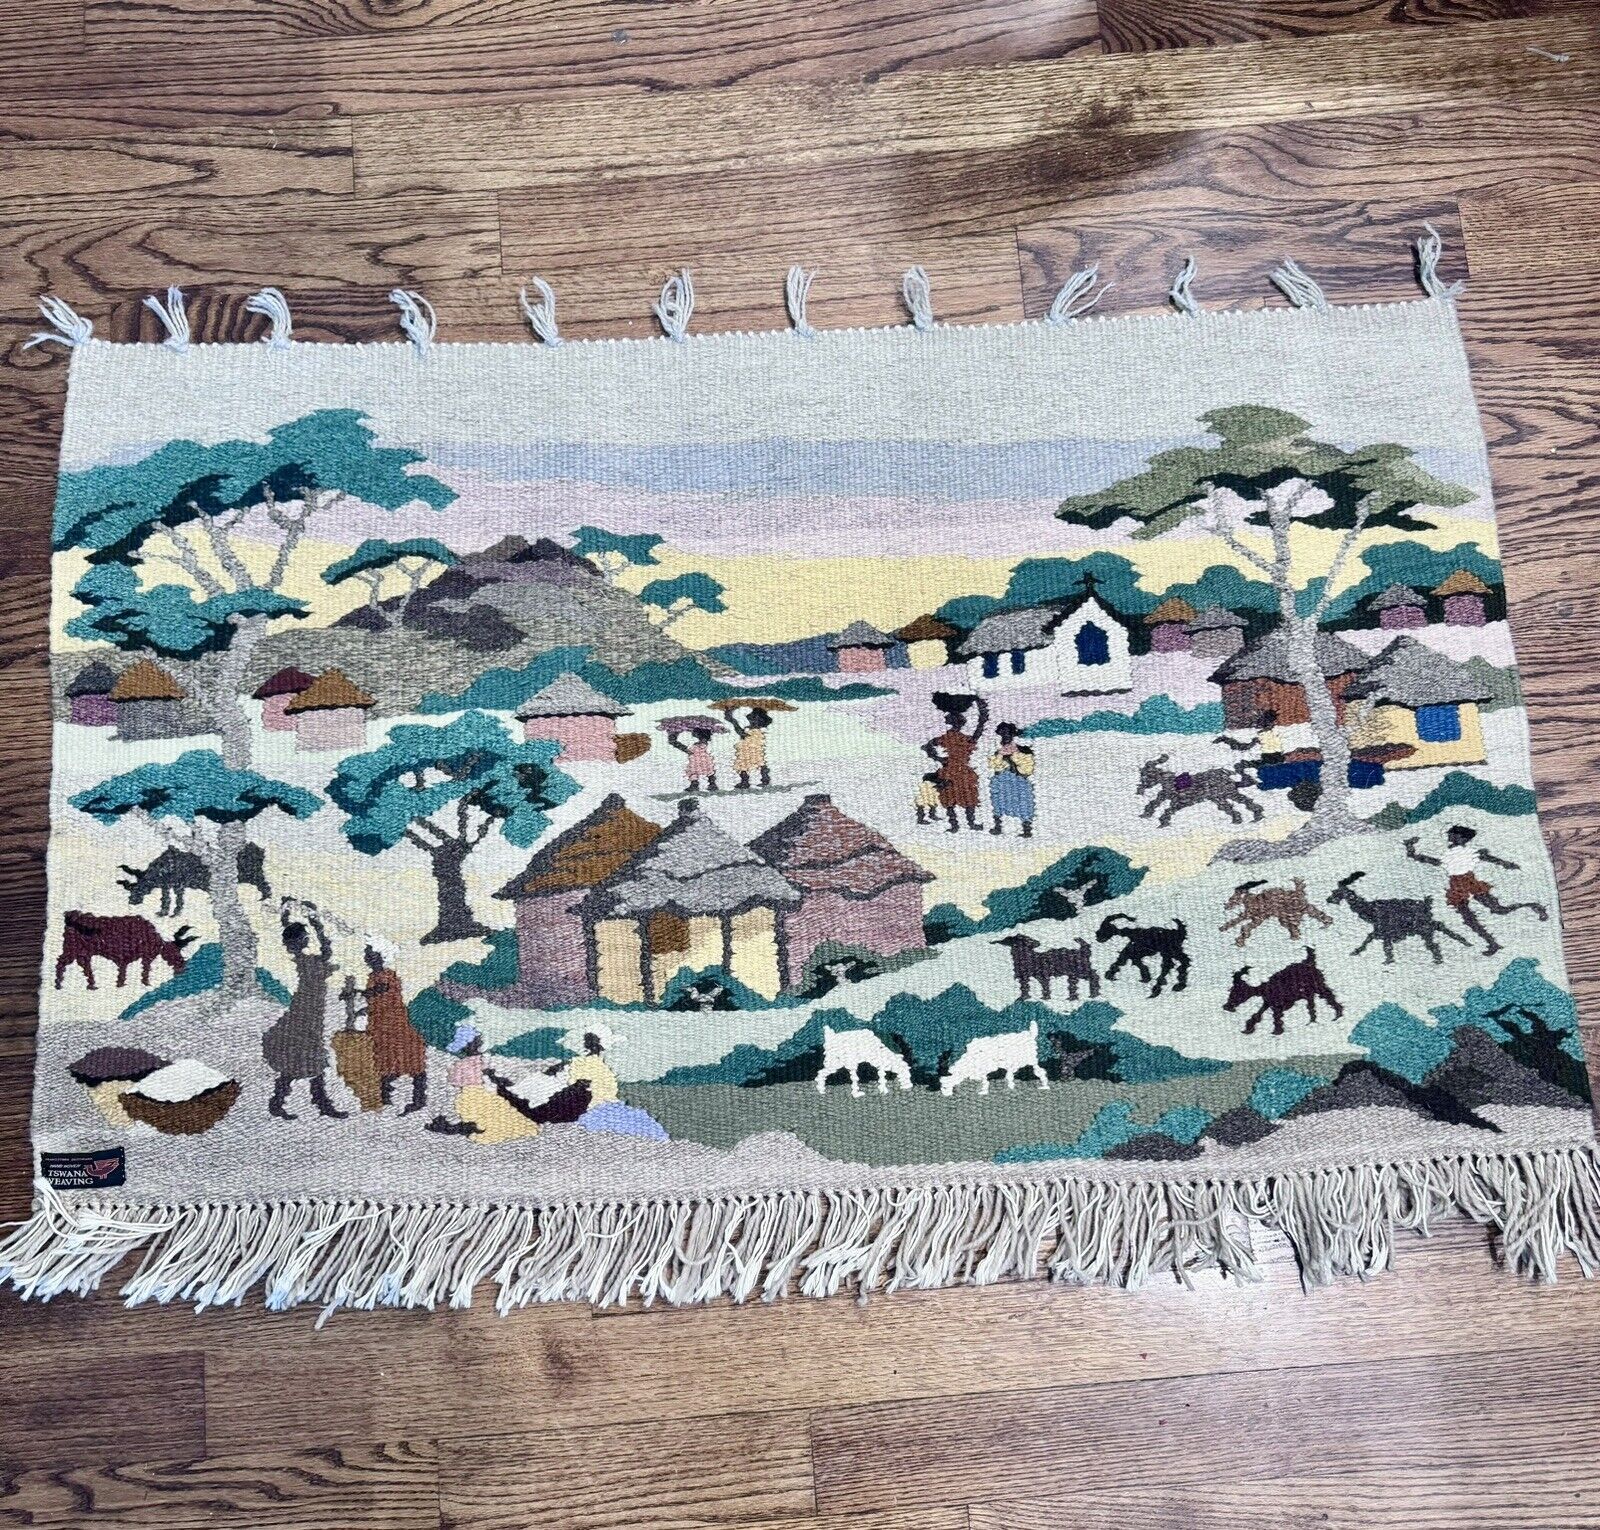 VTG Tribal Tswana Textile Tapestry Hand Woven Wall Hanging African Village 50x25